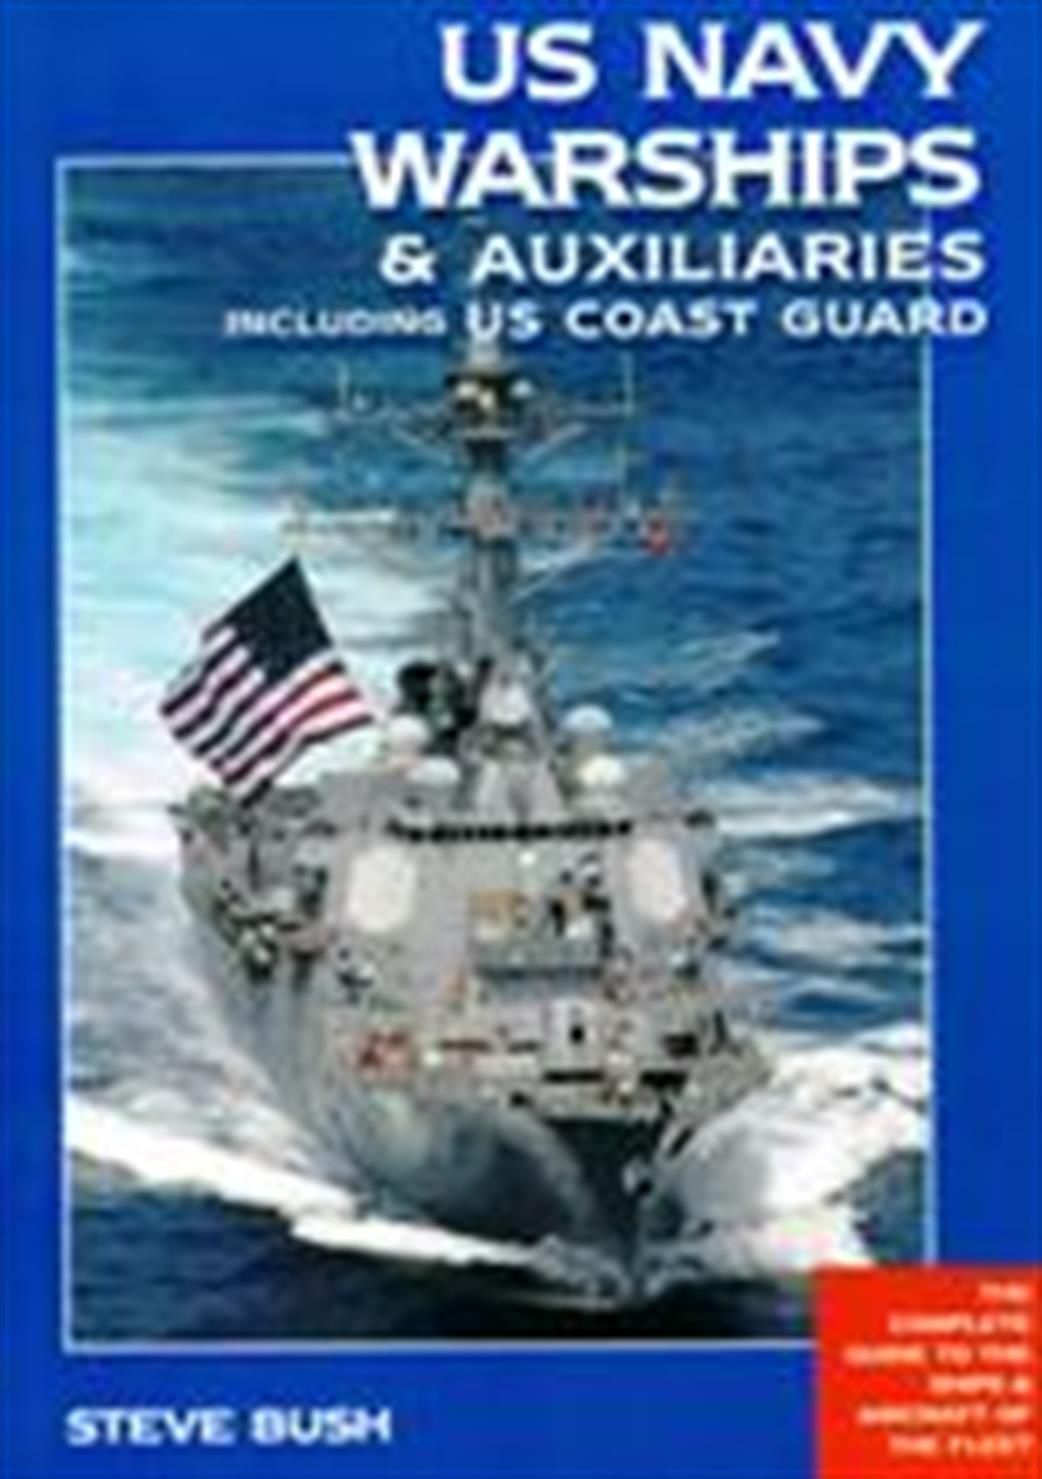 9781904459620 US Navy Warships & Auxiliaries by Steve Bush